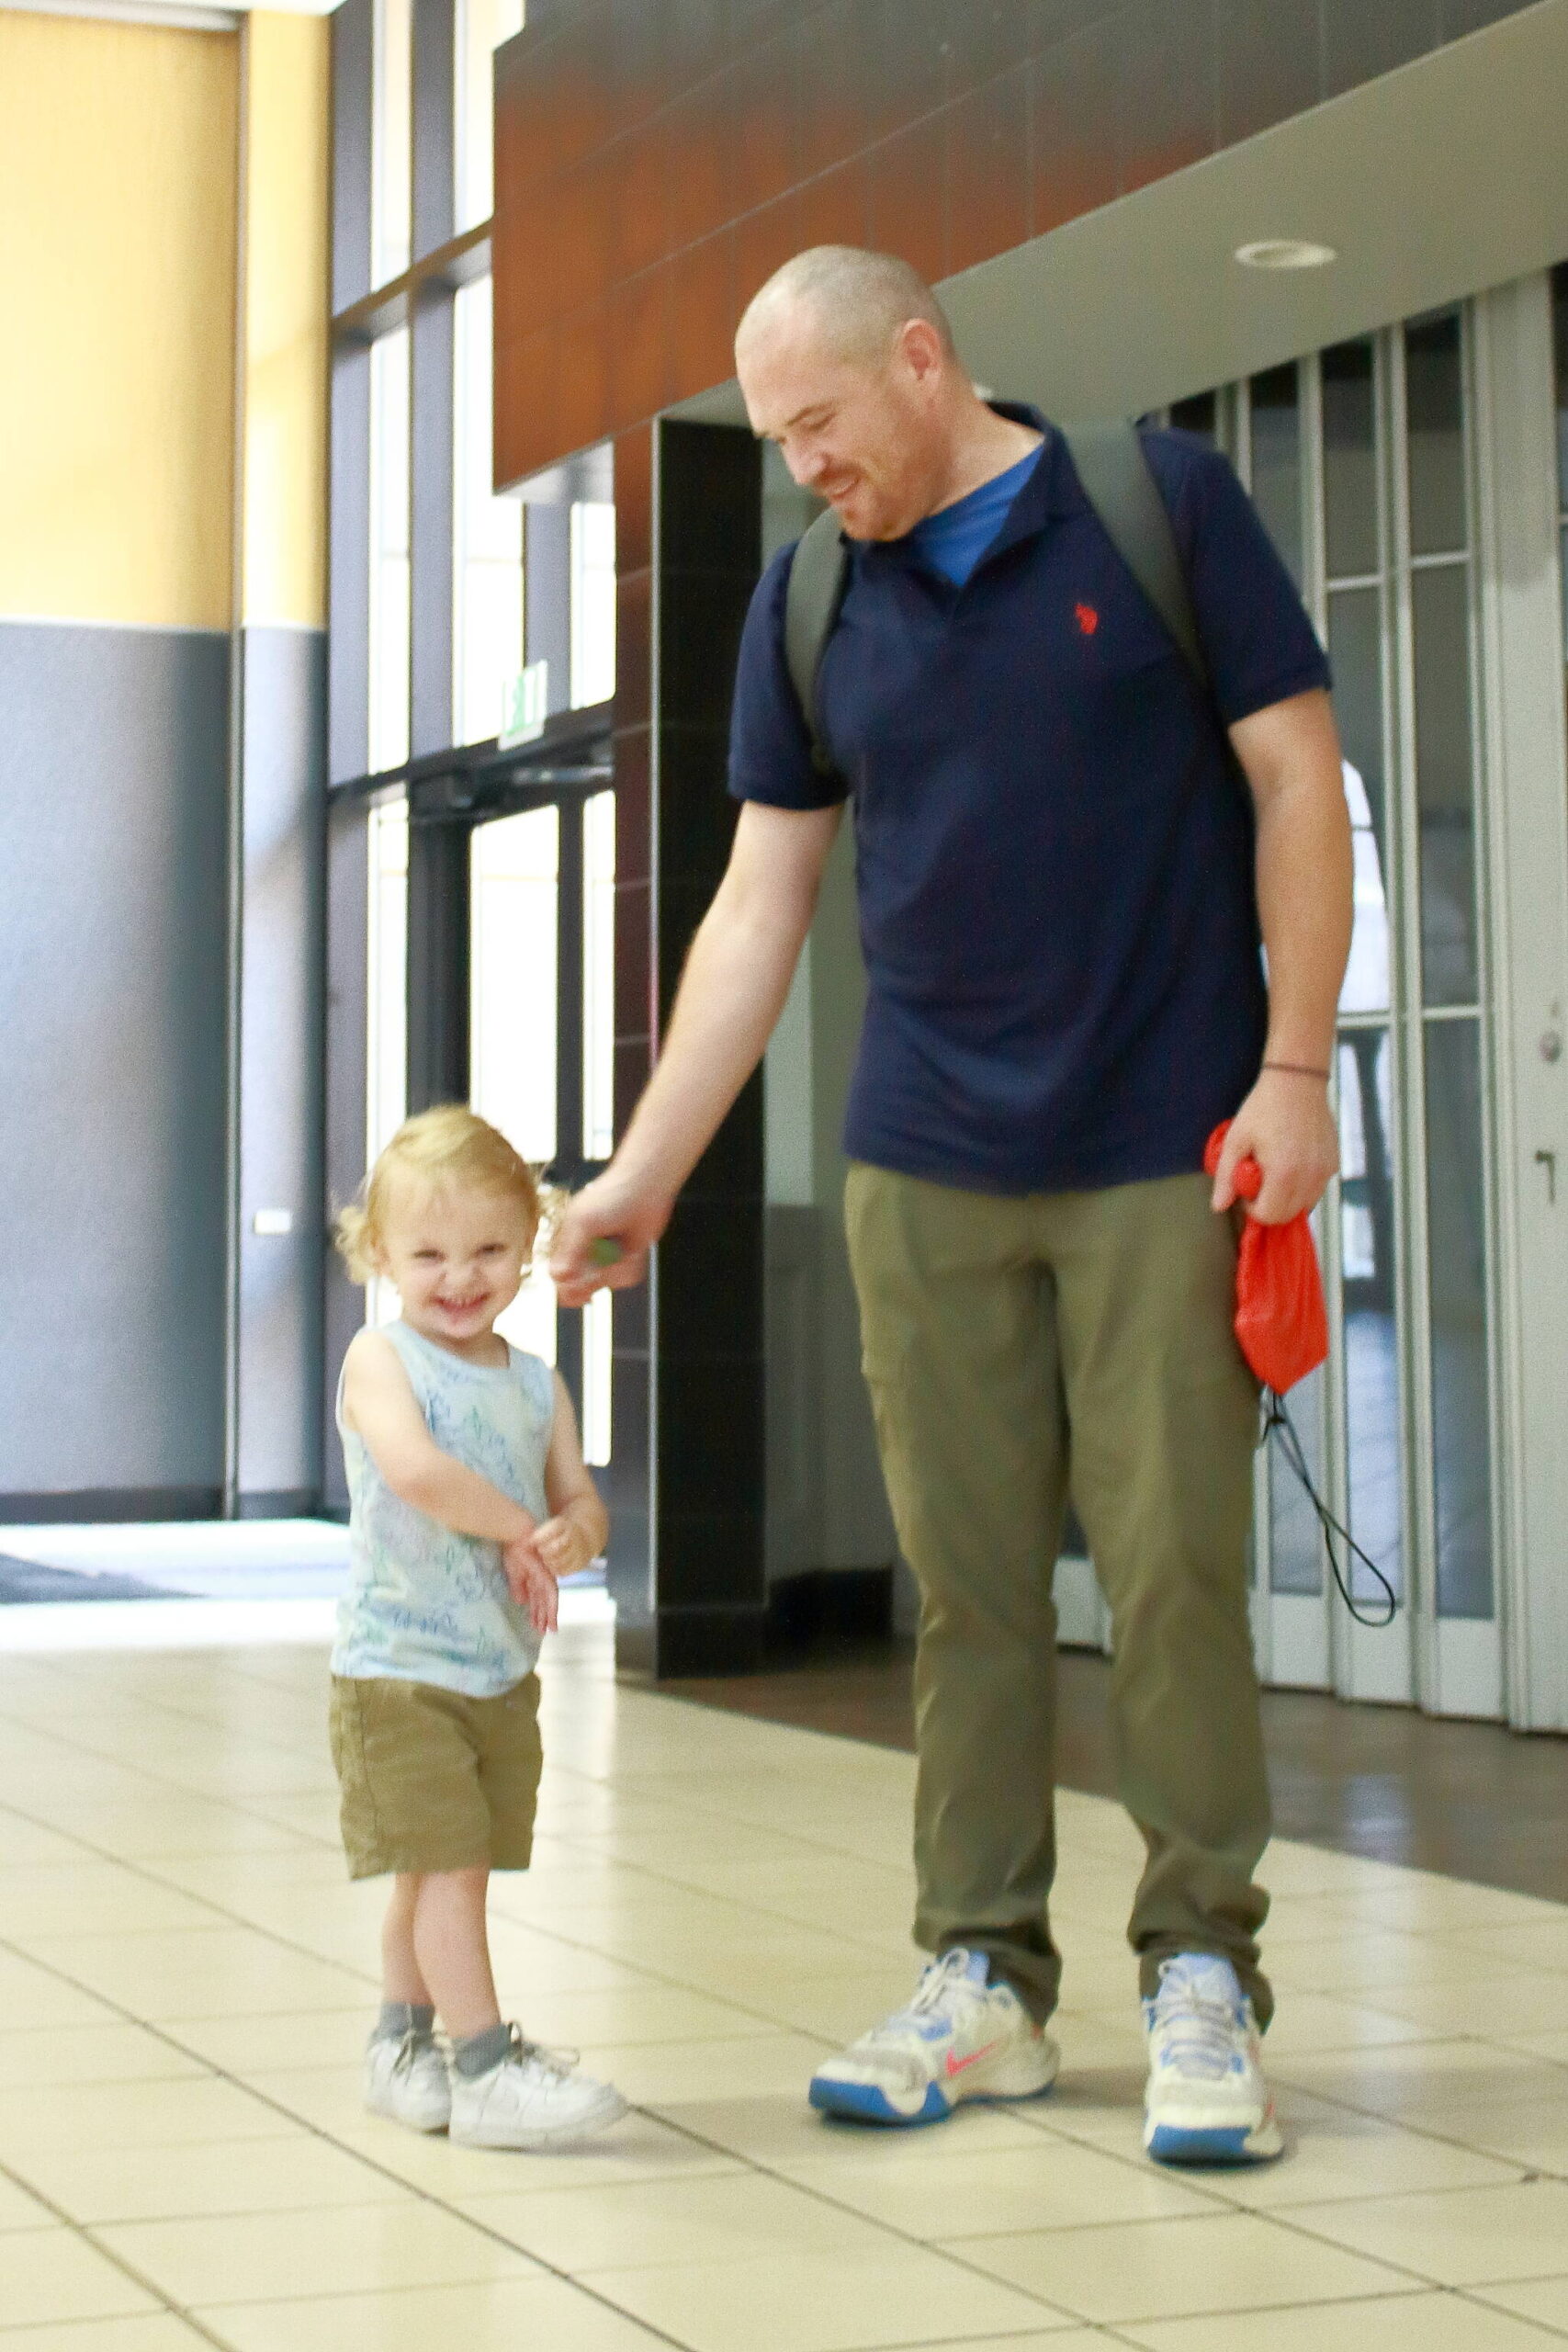 Jared Gloster and son Gavin at the Commons Mall in Federal Way. Photo by Keelin Everly-Lang / The Mirror